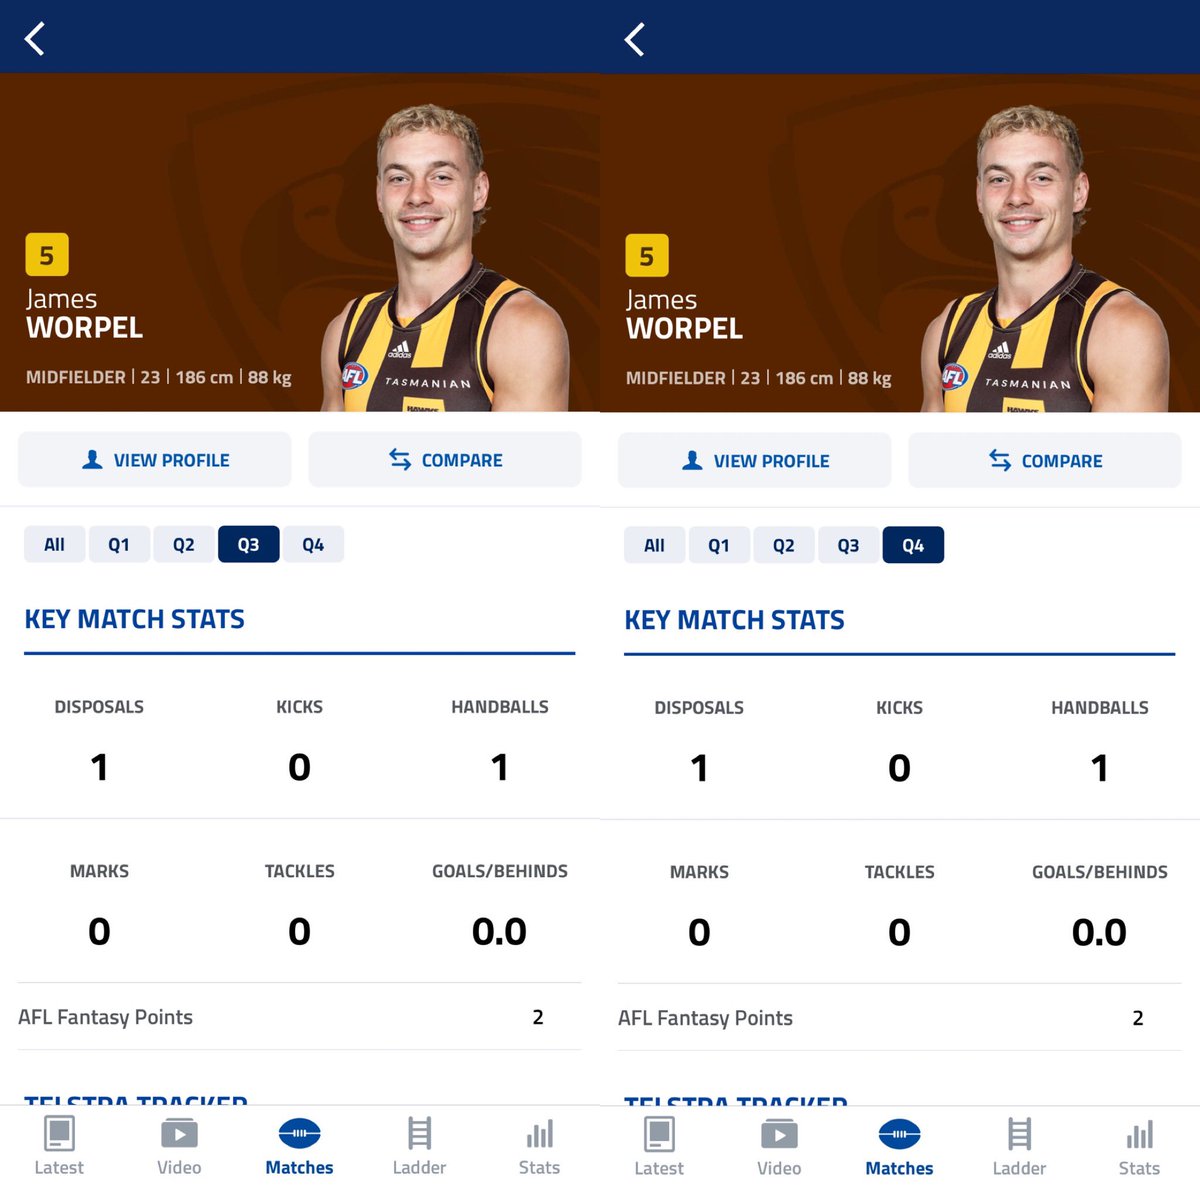 James Worpel had a total of 2 disposals in the second half.
Game is on the line and he was nowhere to be found.
Not acceptable @HawthornFC 
#AFLDonsHawks #AlwaysHawthorn